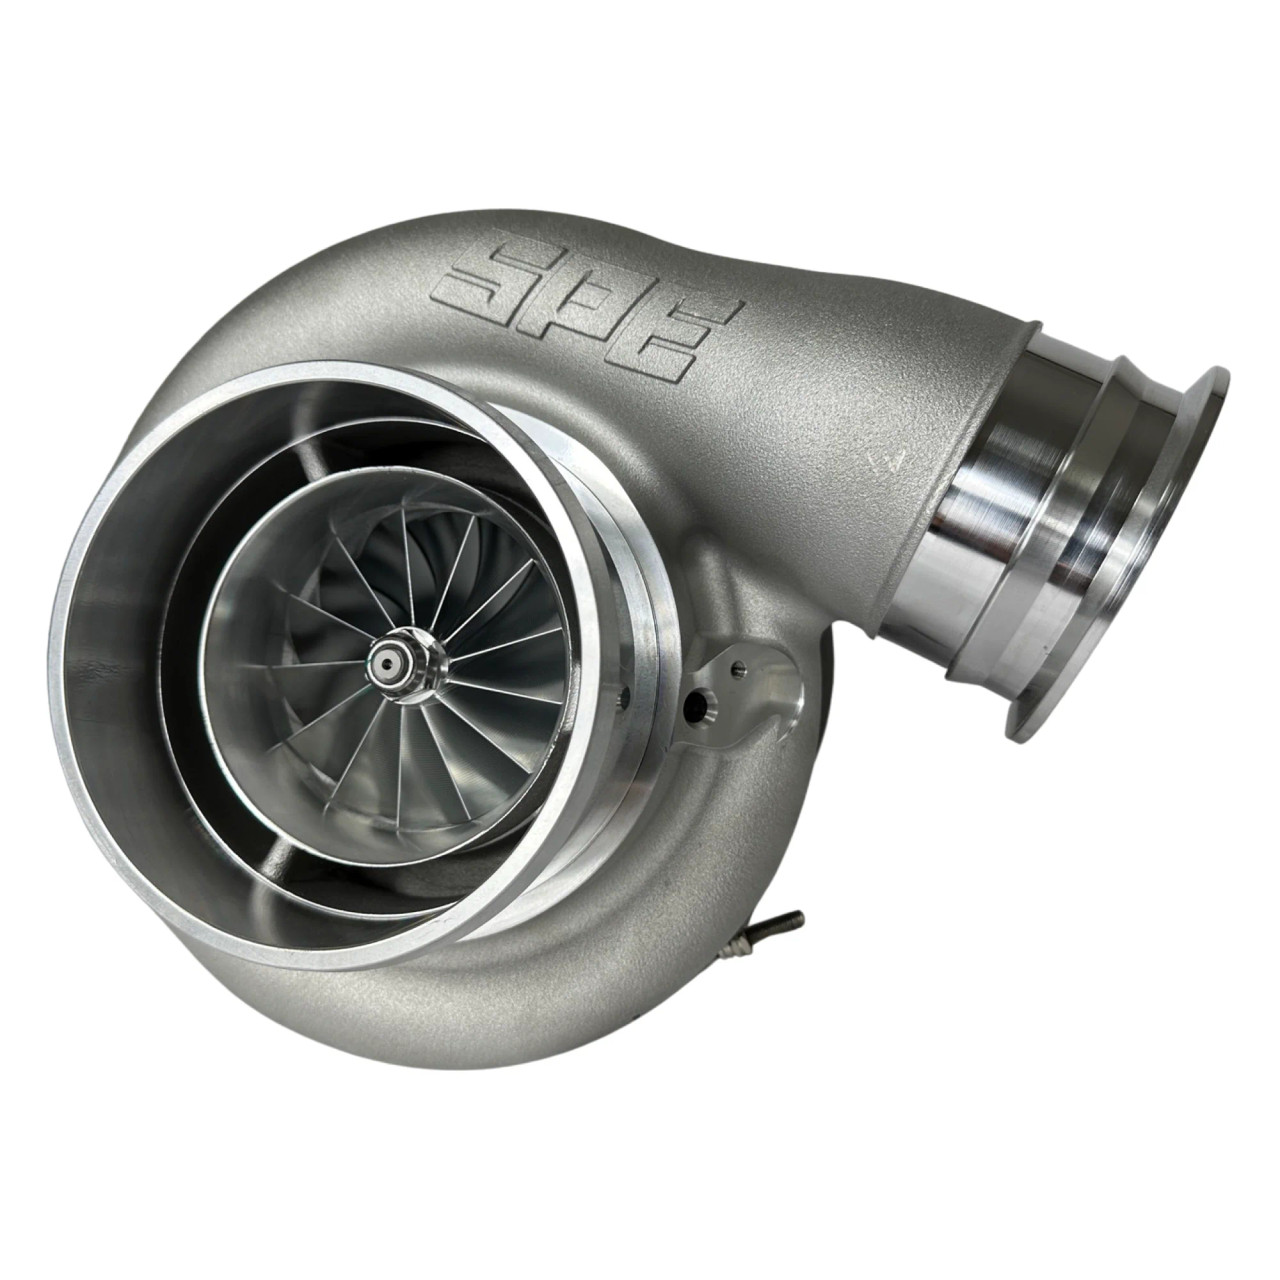 SPE S88102B TURBOCHARGER - Side VIew